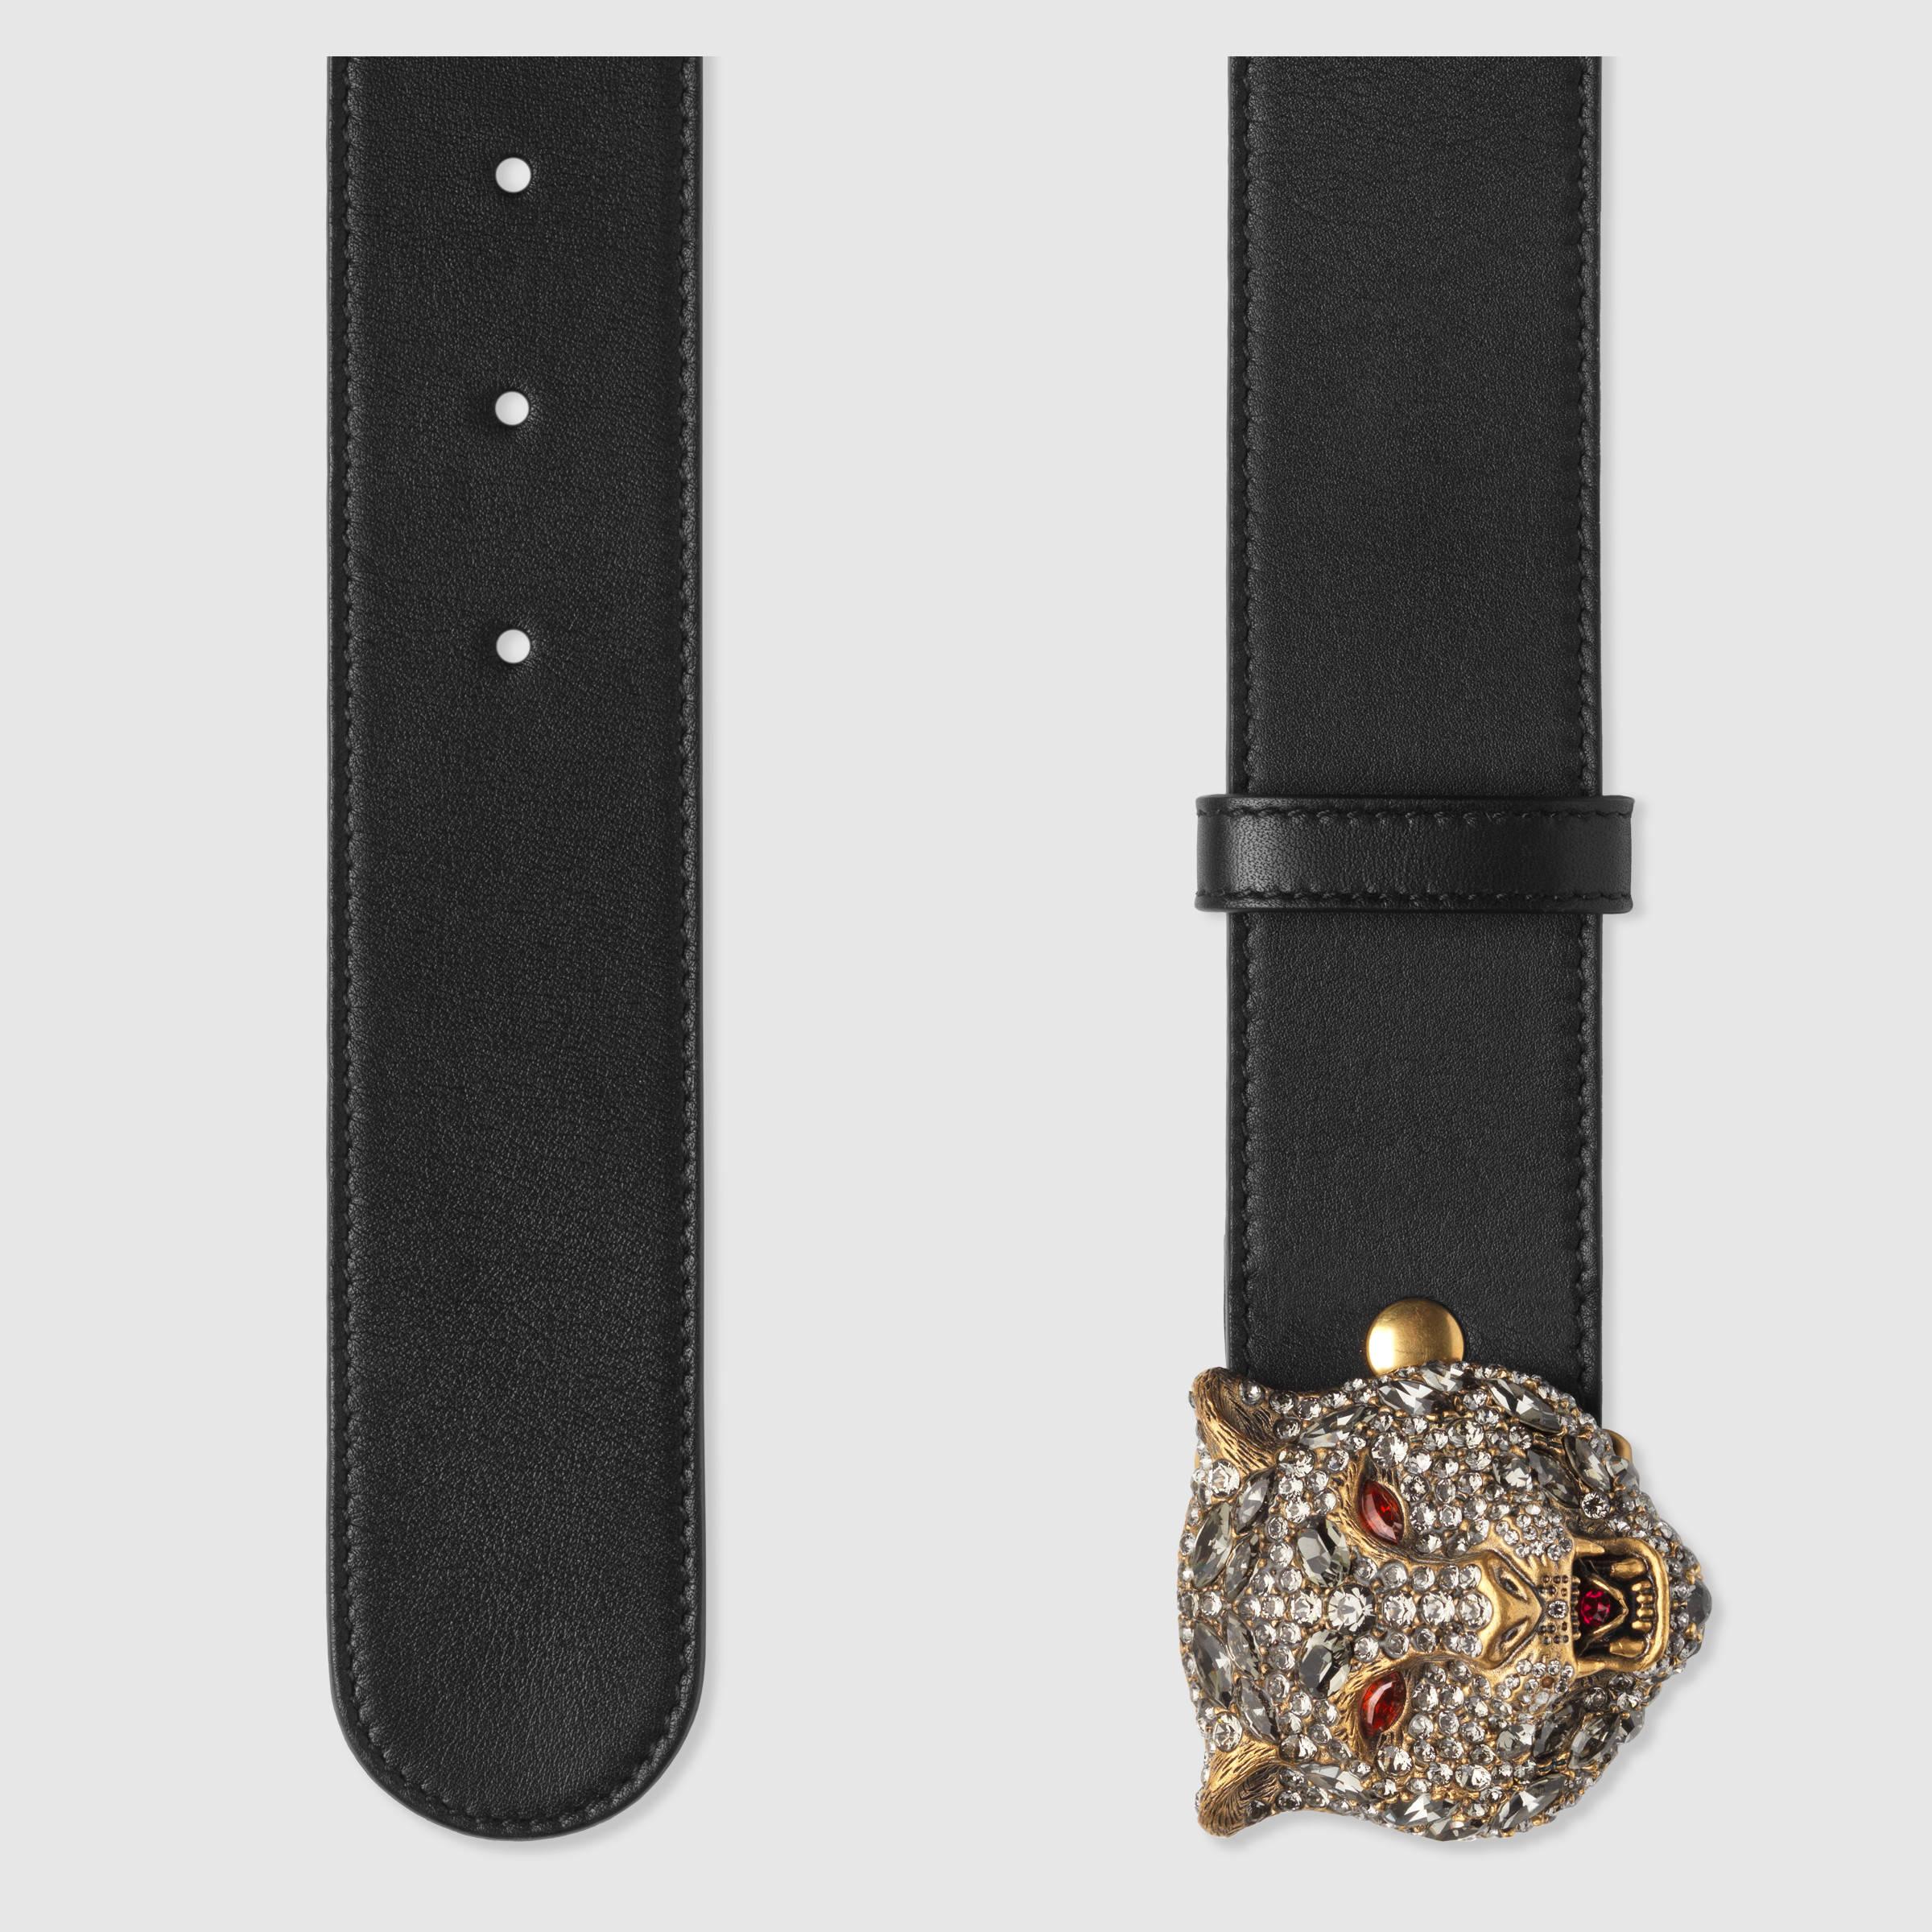 Lyst - Gucci Leather Belt With Crystal Feline Head in Black